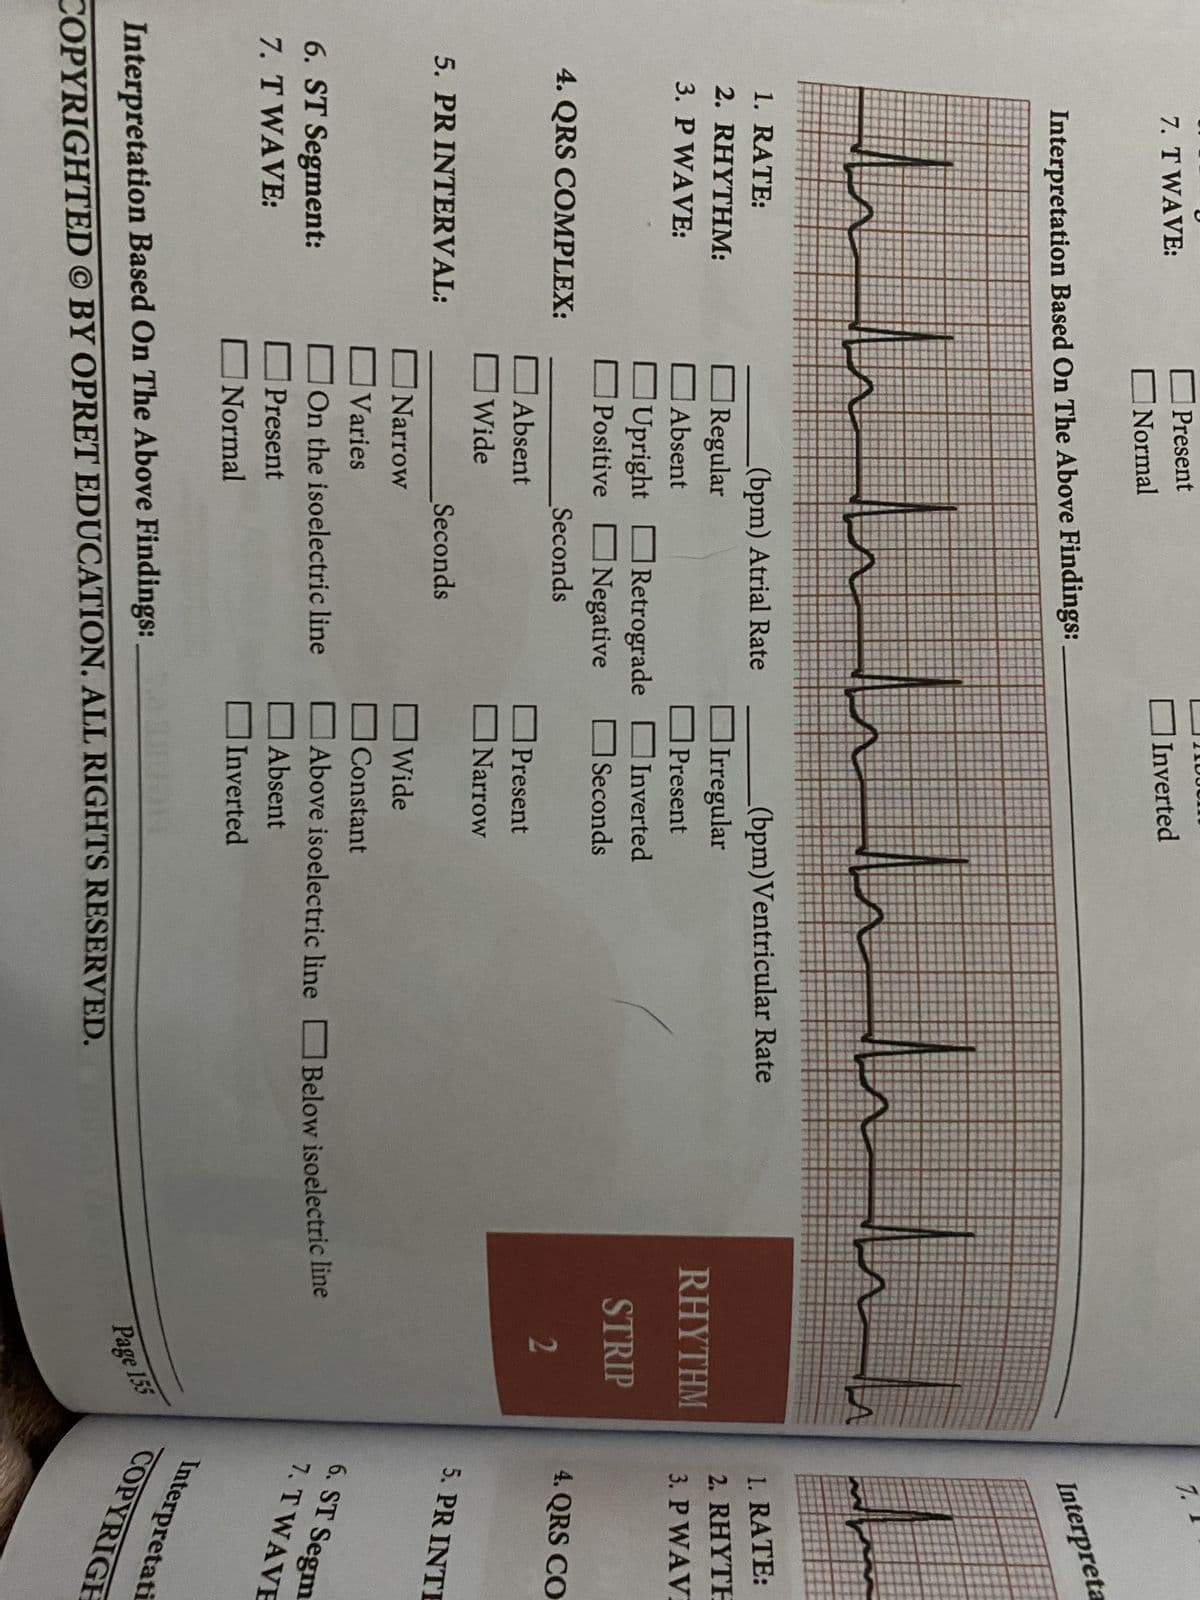 7. T WAVE:
Interpretation Based On The Above Findings:
L
1. RATE:
2. RHYTHM:
3. P WAVE:
4. QRS COMPLEX:
5. PR INTERVAL:
Present
Normal
6. ST Segment:
7. T WAVE:
À
(bpm) Atrial Rate
Regular
Absent
سله اللllll
Upright Retrograde
Positive Negative
Absent
Wide
Seconds
Seconds
Inverted
Narrow
Varies
On the isoelectric line
Present
Normal
(bpm)Ventricular Rate
Irregular
Present
Inverted
Seconds
Present
Narrow
Wide
Constant
Above isoelectric line
Absent
Inverted
Interpretation Based On The Above Findings:
COPYRIGHTED BY OPRET EDUCATION. ALL RIGHTS RESERVED.
RHYTHM
STRIP
2
Below isoelectric line
7.
Page 155
Interpreta
1. RATE:
2. RHYTH
3. P WAV
4. QRS CO
5. PRINTE
6. ST Segm
7. TWAVE
Interpretati
COPYRIGH